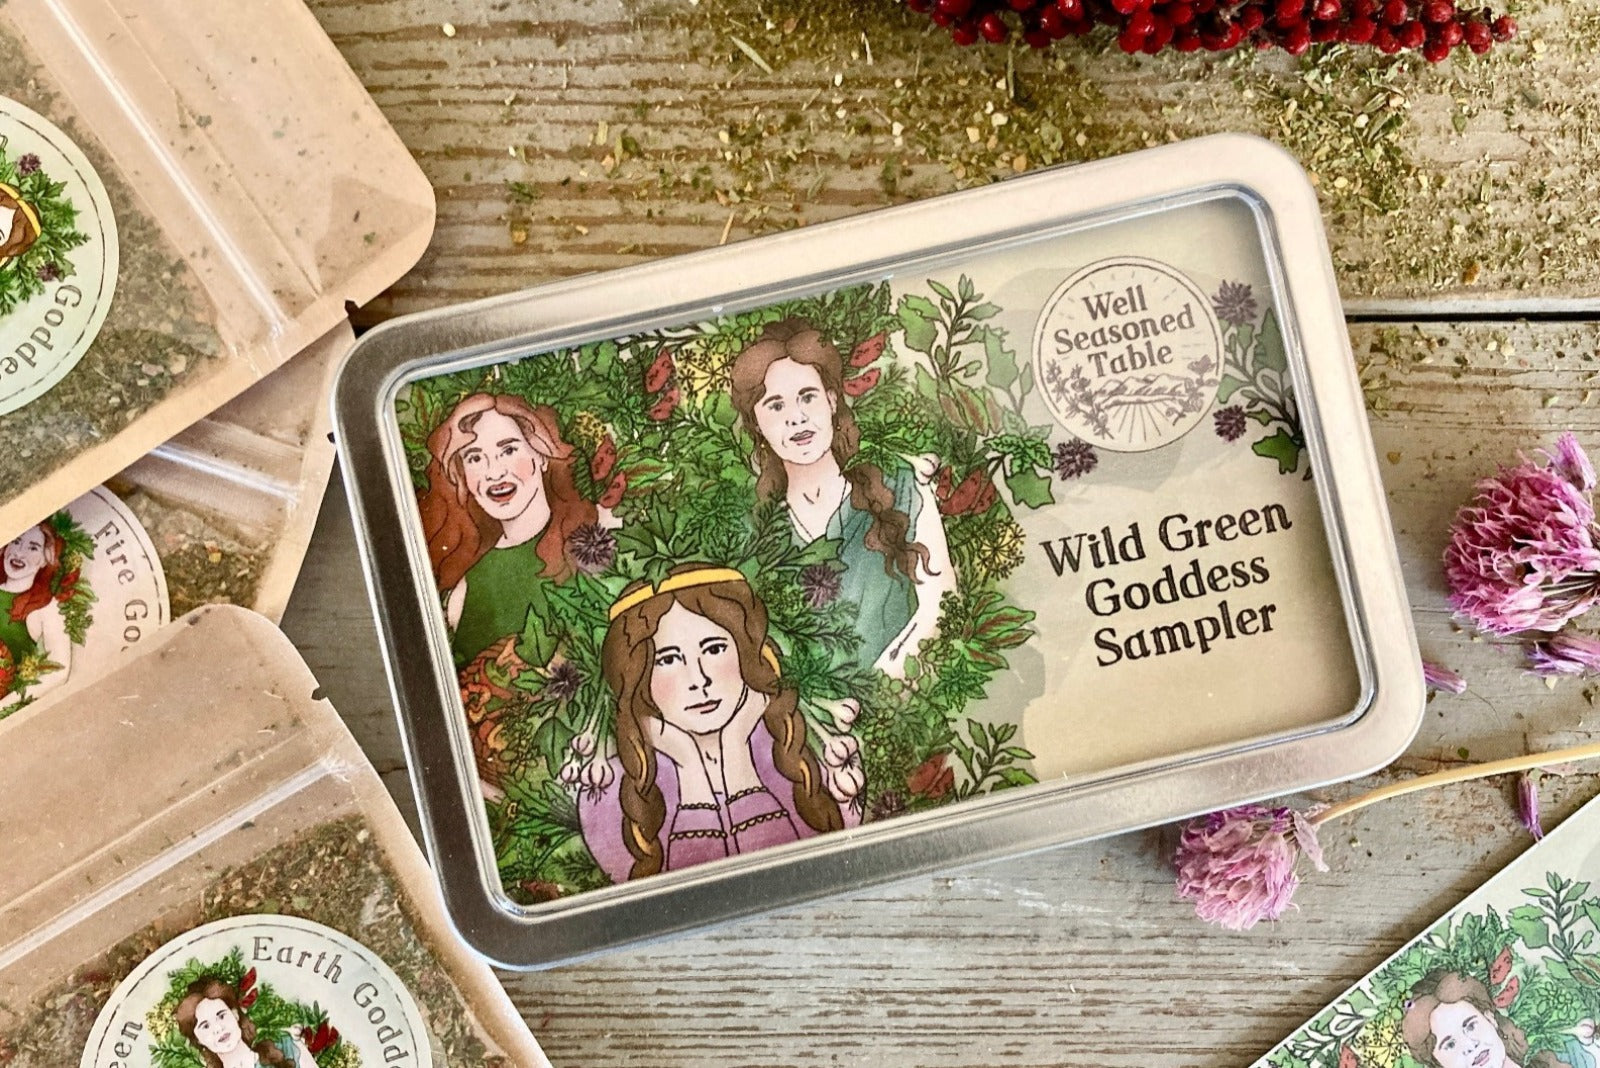 A sampler tin of Wild Green Goddess seasonings from Well Seasoned Table with packets of seasonings and dried spices around it.